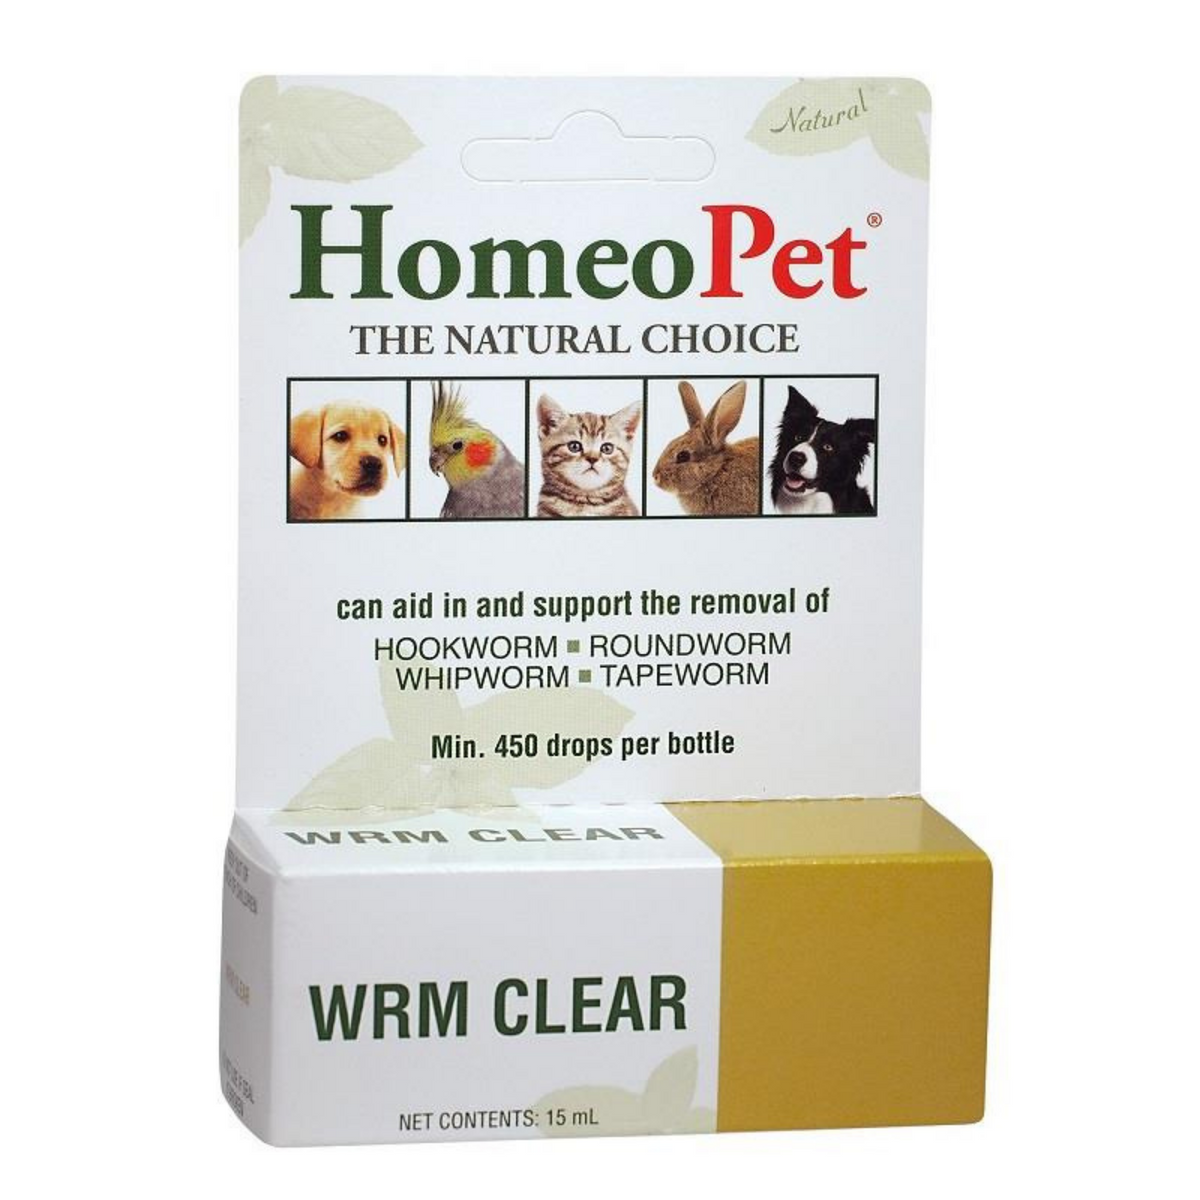 Primary image of Worm Clear Remedy